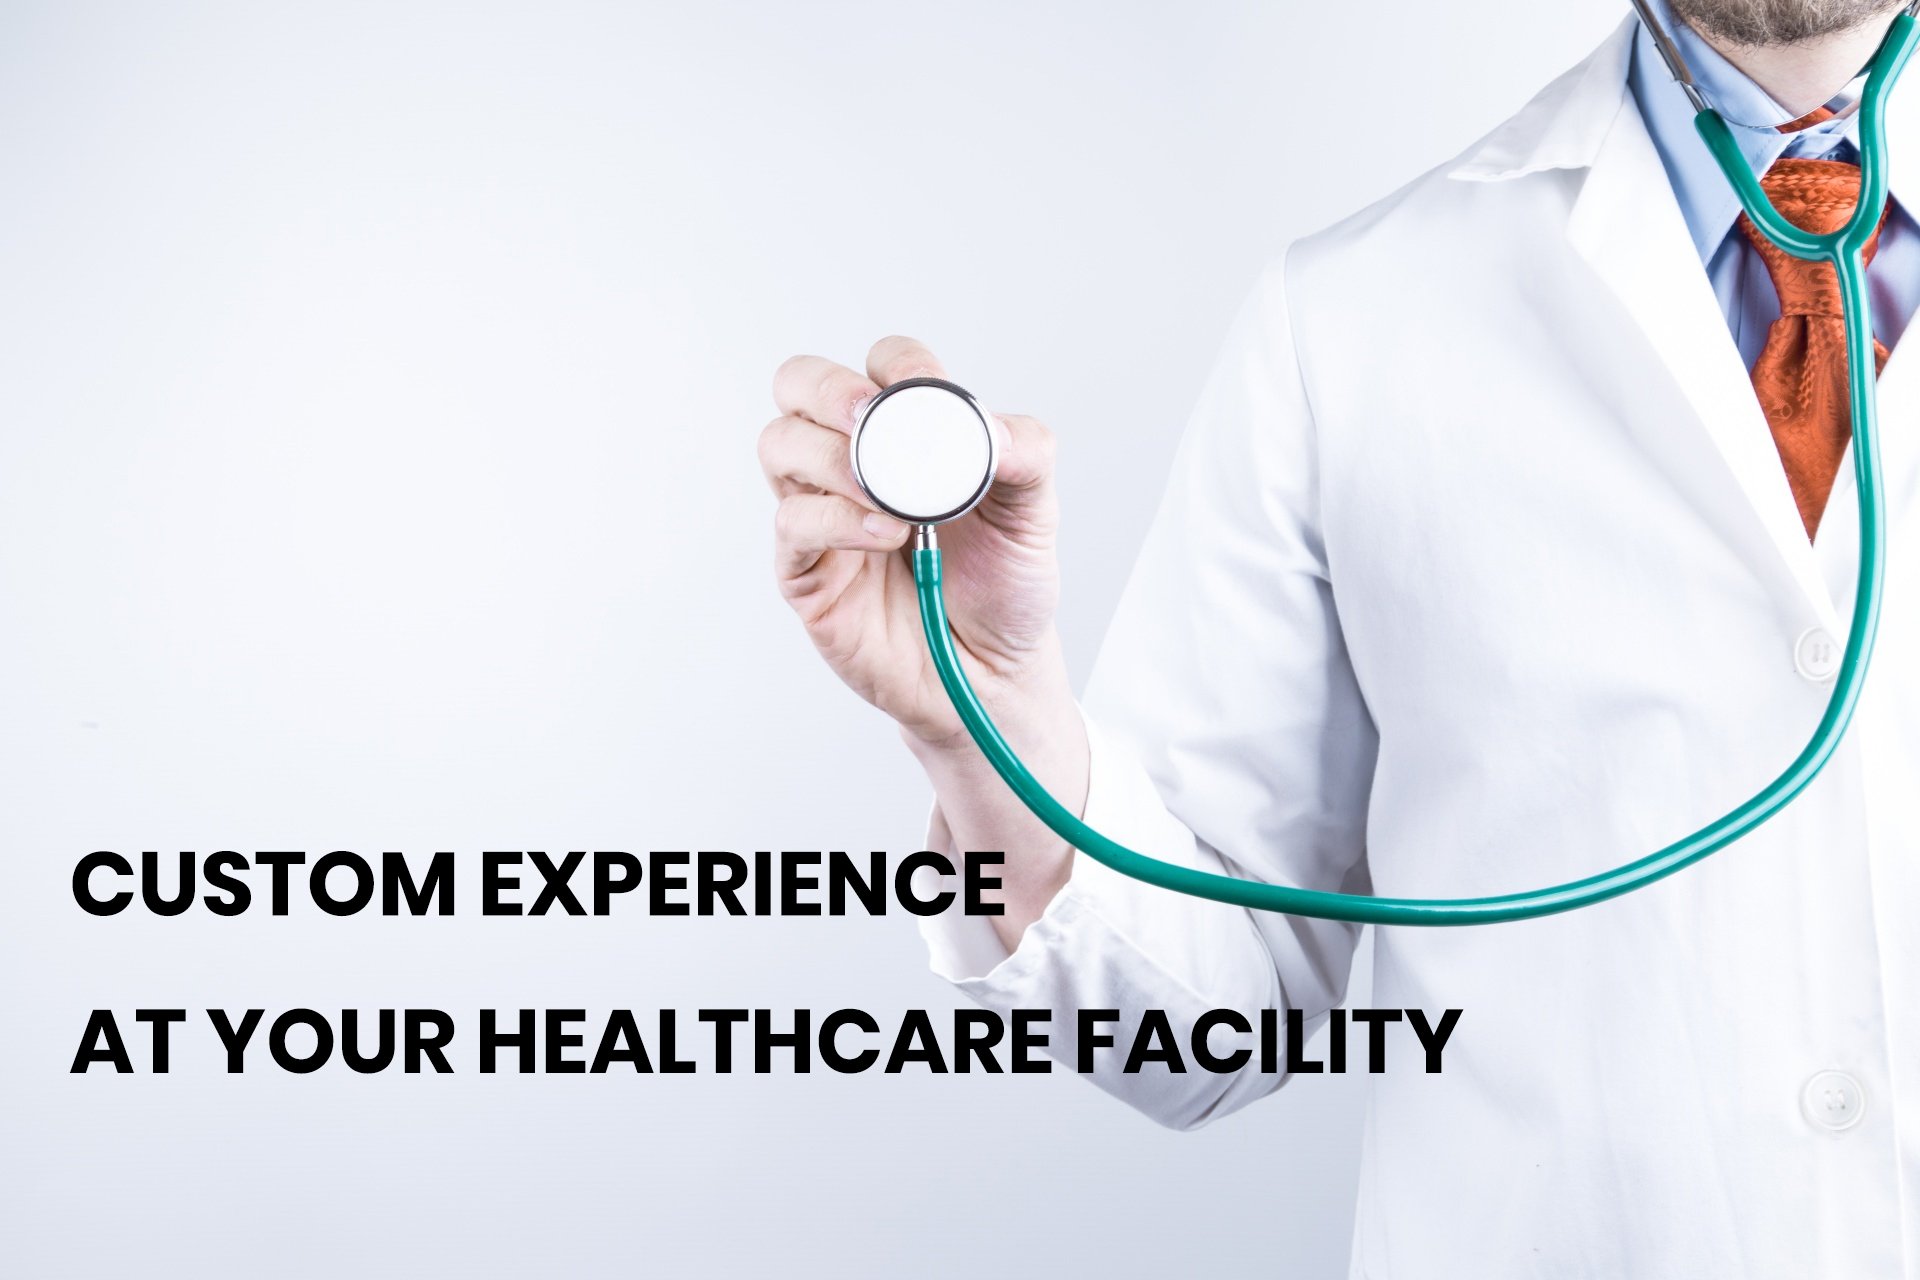 customer experience in healthcare